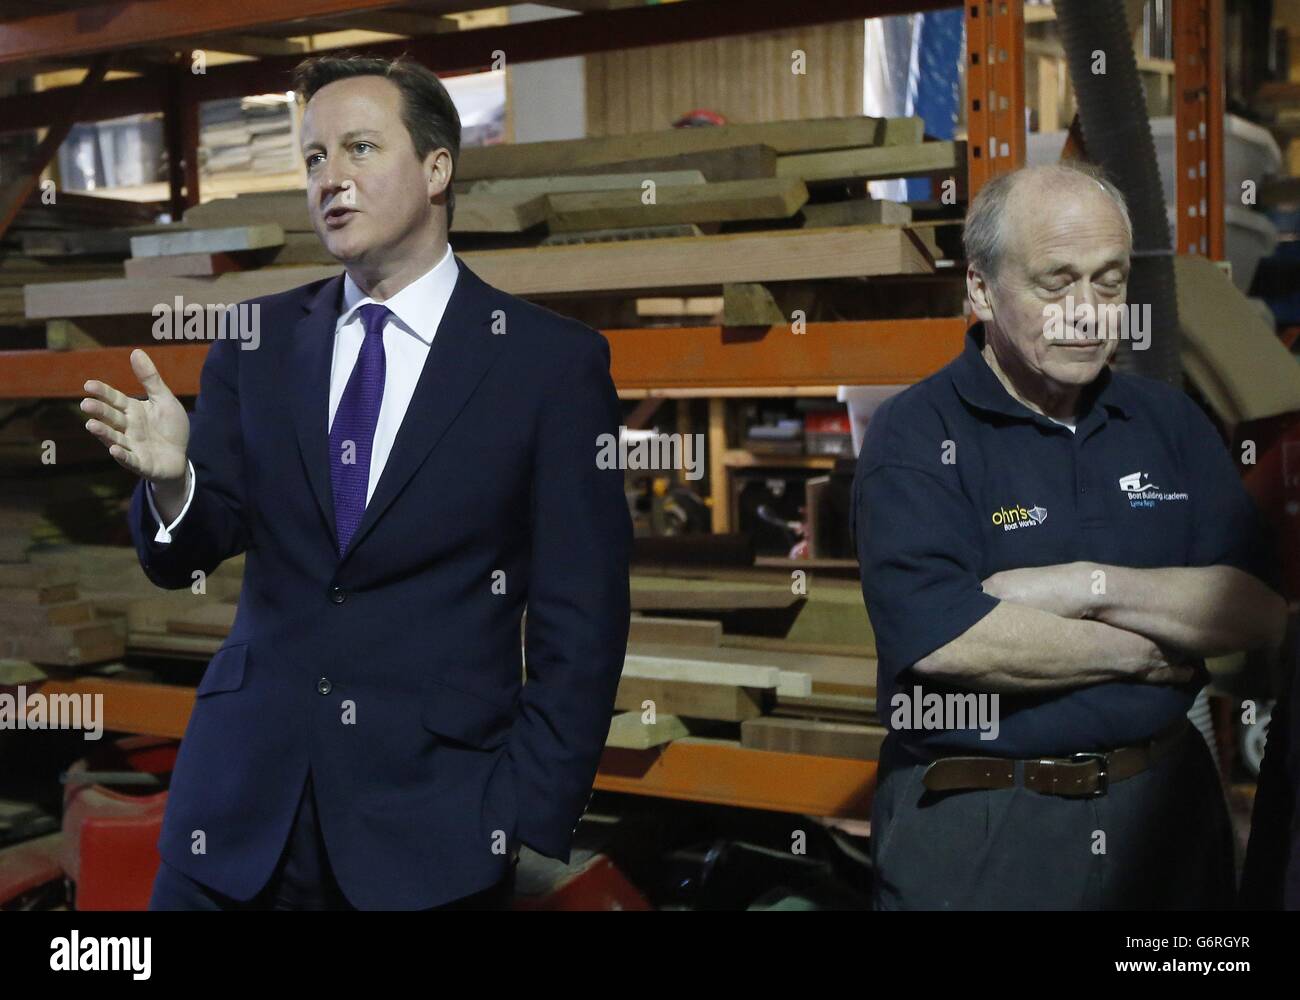 Prime Minister David Cameron (left) with boat builder and restorer John Watson during a visit to small businesses at Lots Ait Boatyard in Brentford, west London. Stock Photo